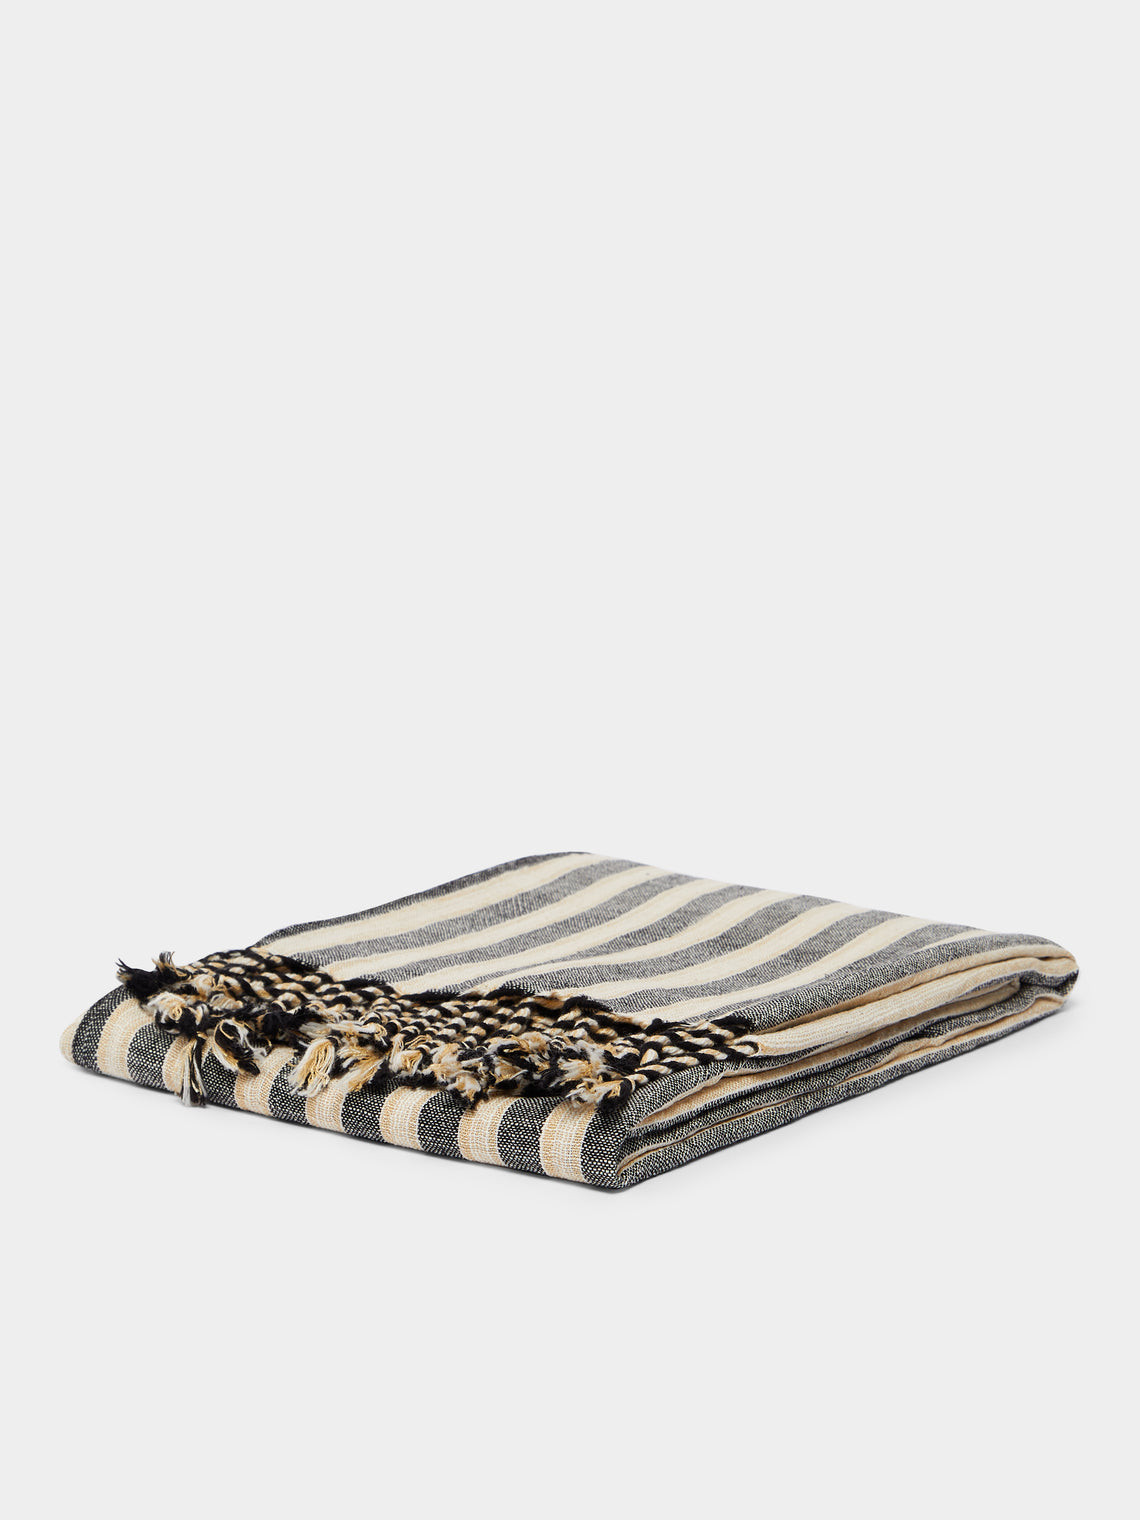 Mizar & Alcor - Striped Handwoven Linen and Cotton Towels (Set of 2) -  - ABASK